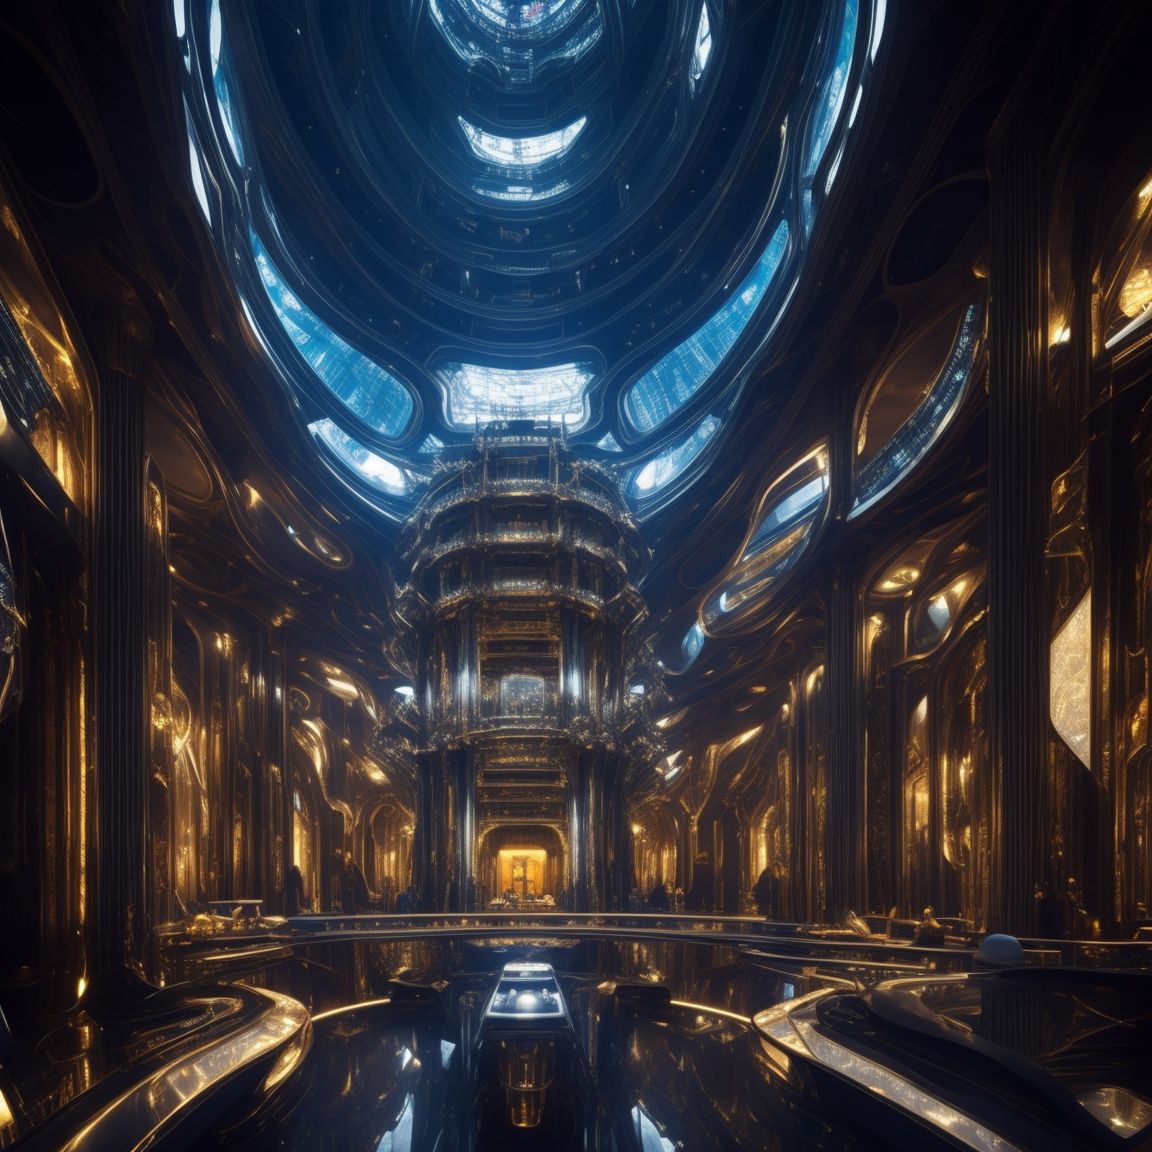 Interior of a lavish huge luxurious alien palace. Futuristic, advanced extraterrestrial technology. Royal rich regal alien architecture. Alien monarch in the center.